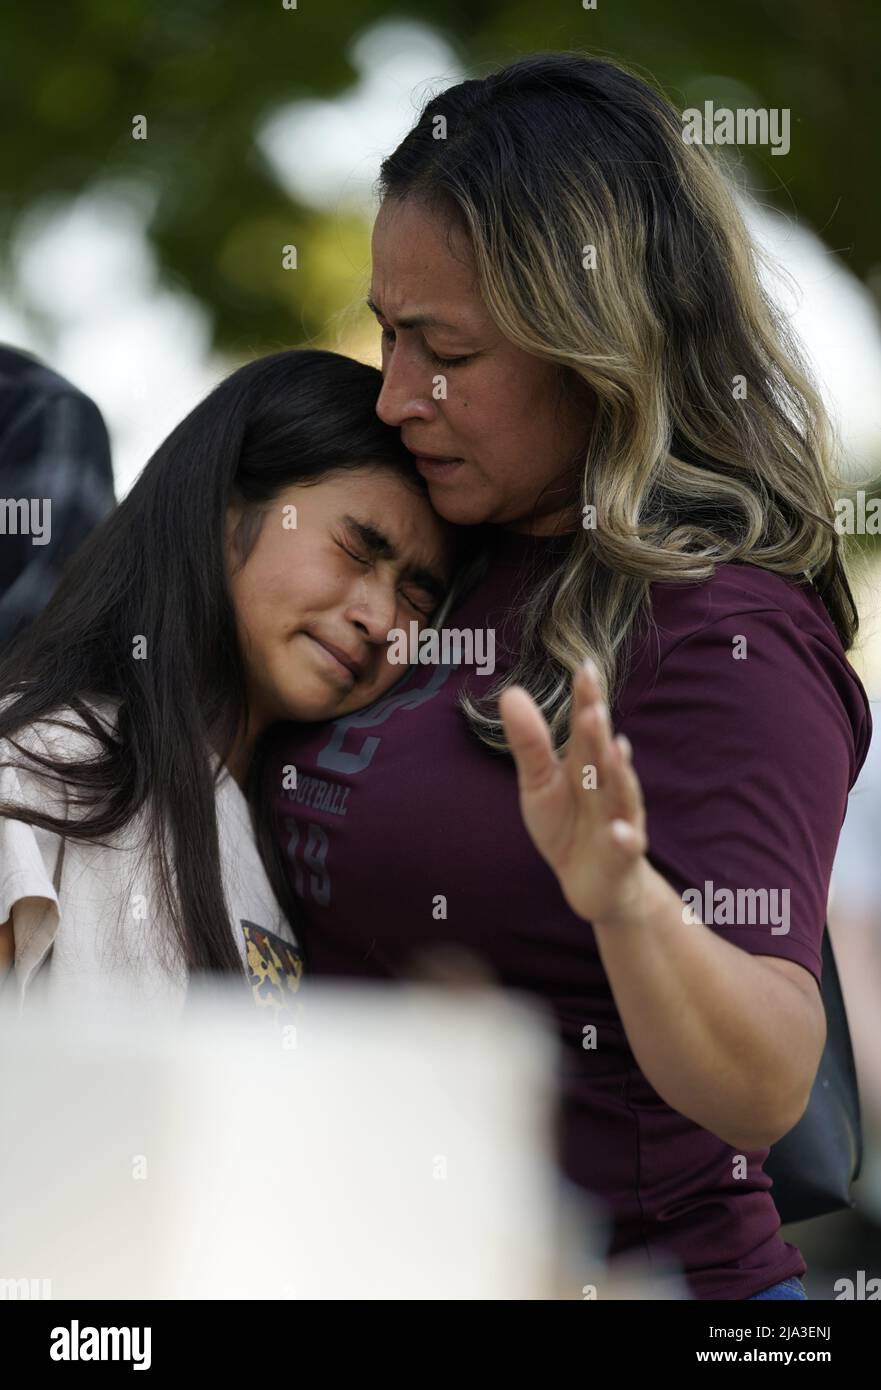 Uvalde, USA. 26th May, 2022. People mourn for victims of a school mass shooting in Uvalde, Texas, the United States, May 26, 2022. At least 19 children and two adults were killed in a shooting at Robb Elementary School in the town of Uvalde, Texas, on Tuesday. Credit: Wu Xiaoling/Xinhua/Alamy Live News Stock Photo